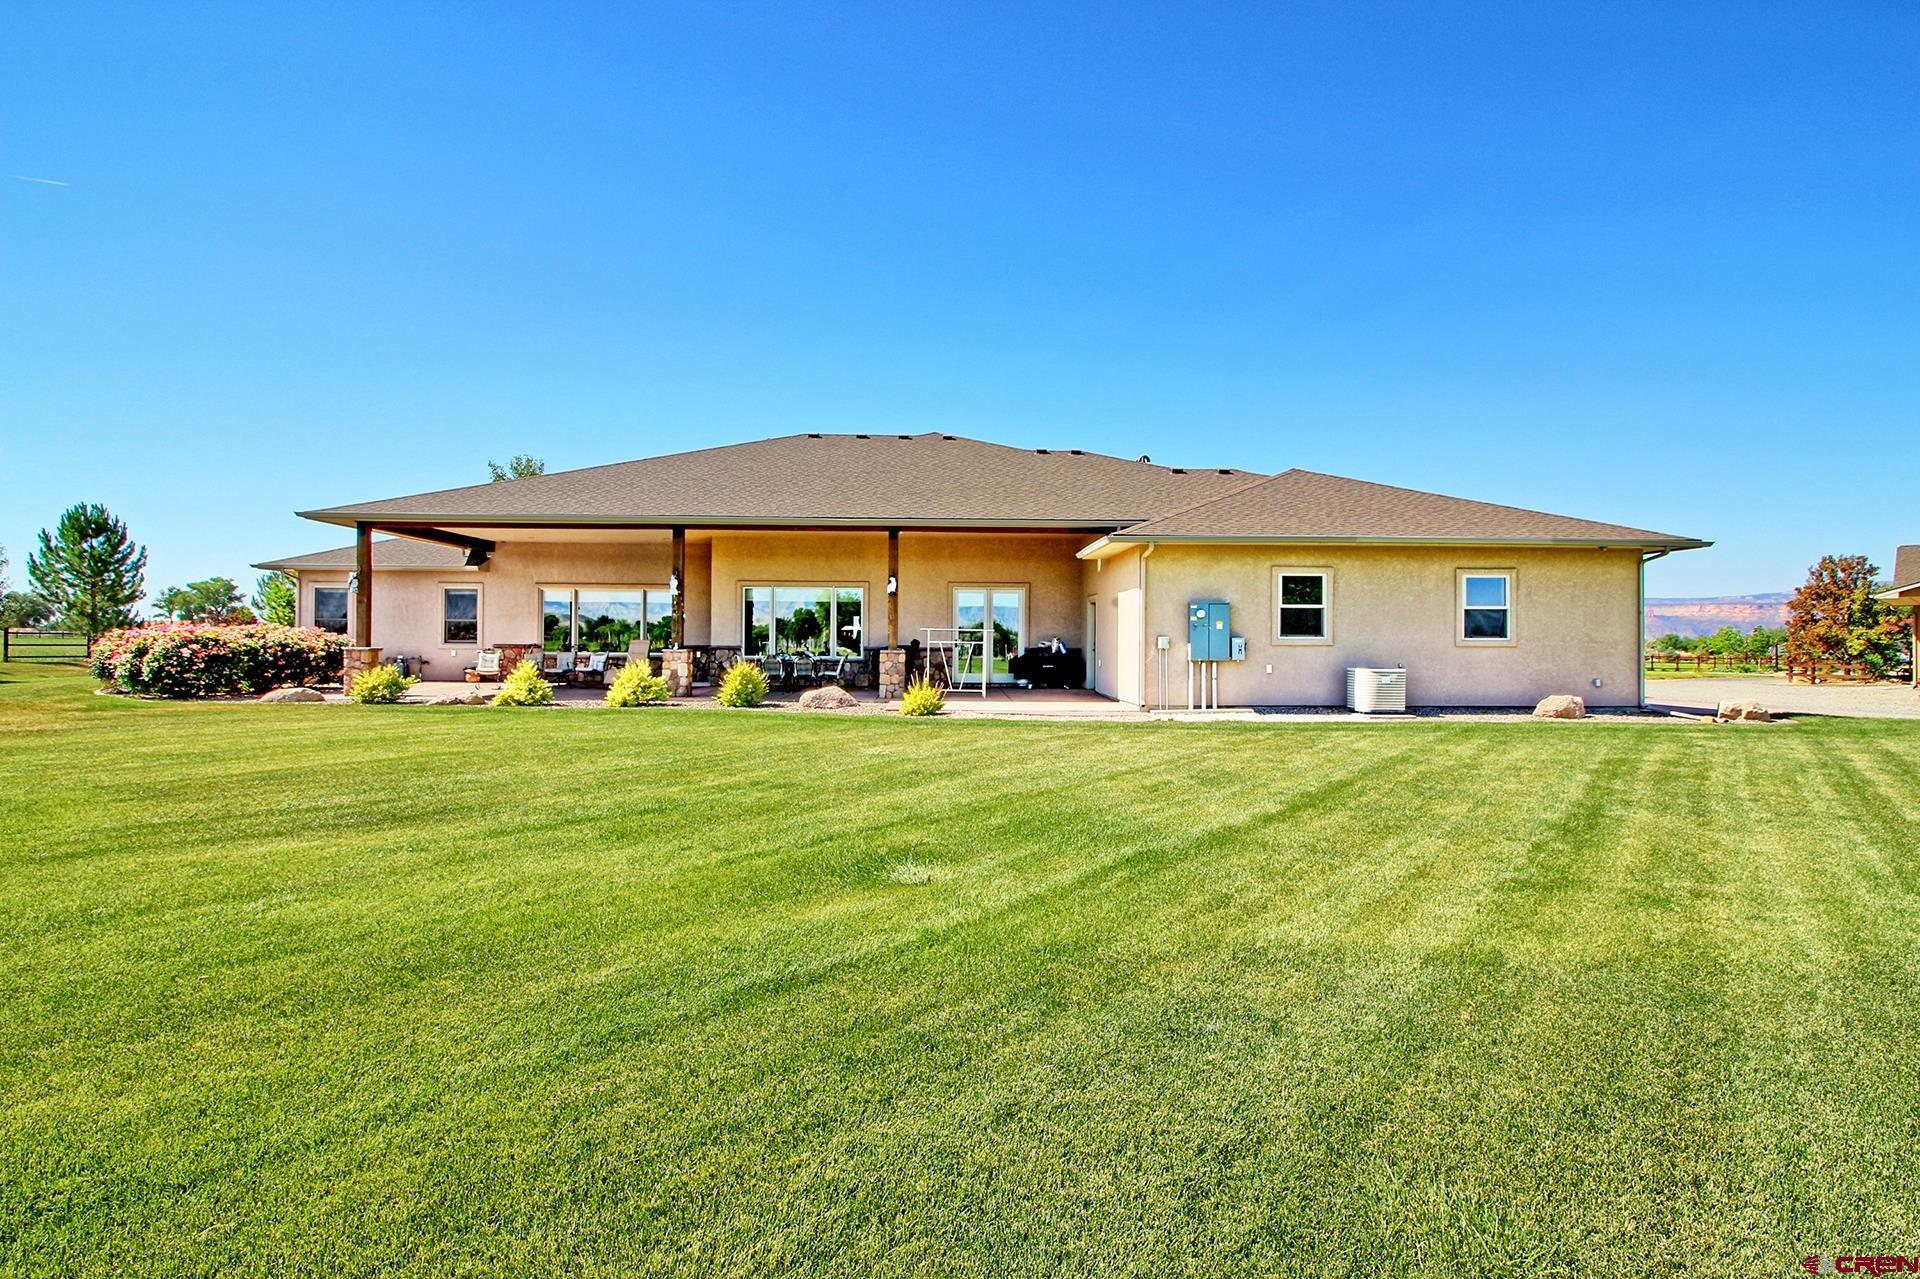 971 24 Road, Grand Junction, CO 